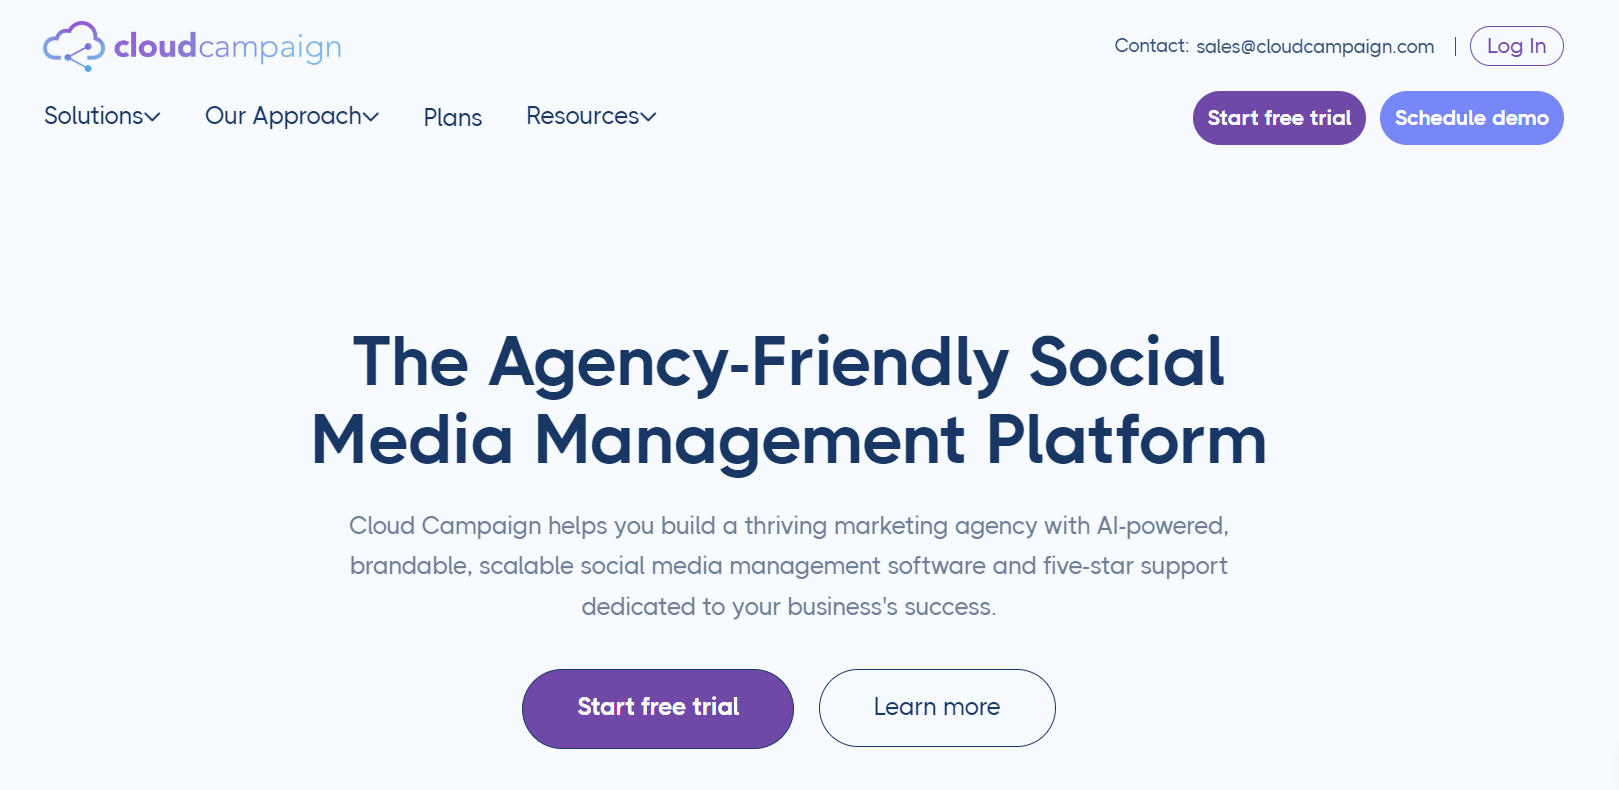 Cloud Campaign homepage with the motto "The Agency-Friendly Social Media Management Platform" and a call to action buttons to "Start free trials" or "Learn more".